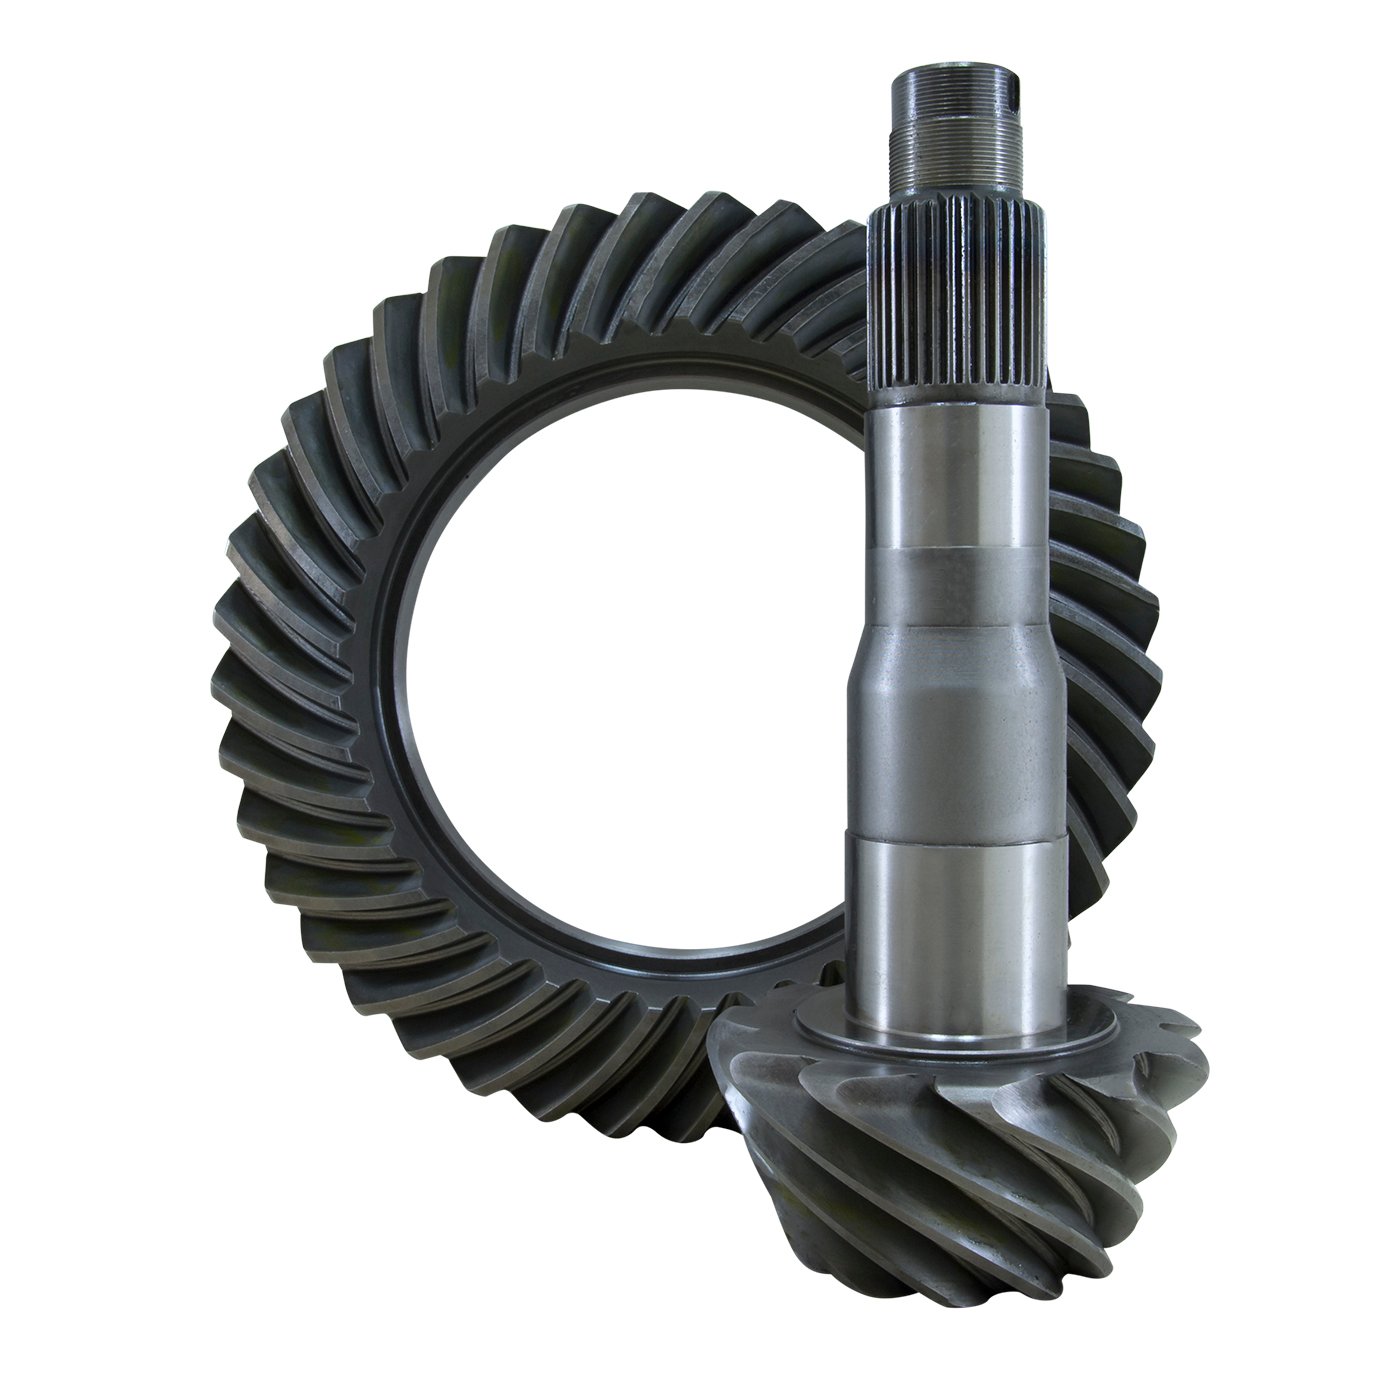 USA Standard 36430 Ring & Pinion Gear Set, For '11 & Up Ford 10.5 in., 4.56 Ratio.